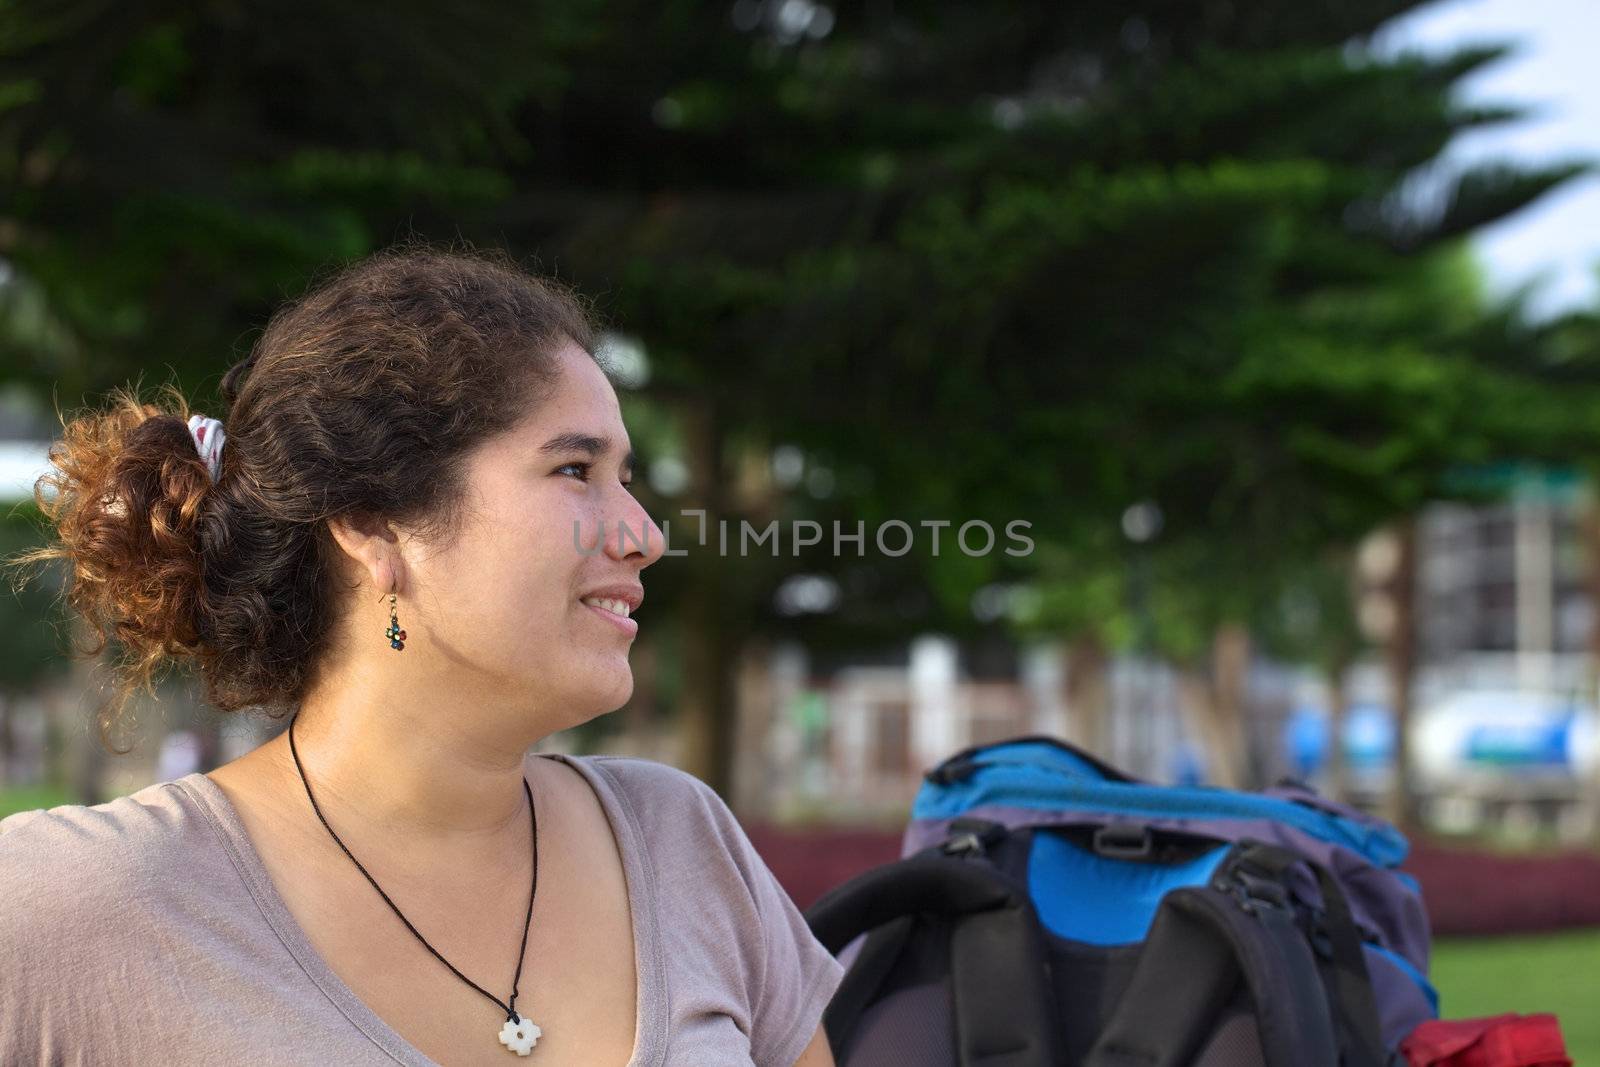 Young smiling Peruvian woman with backpack in park (Selective Focus, Focus on the face of the woman)